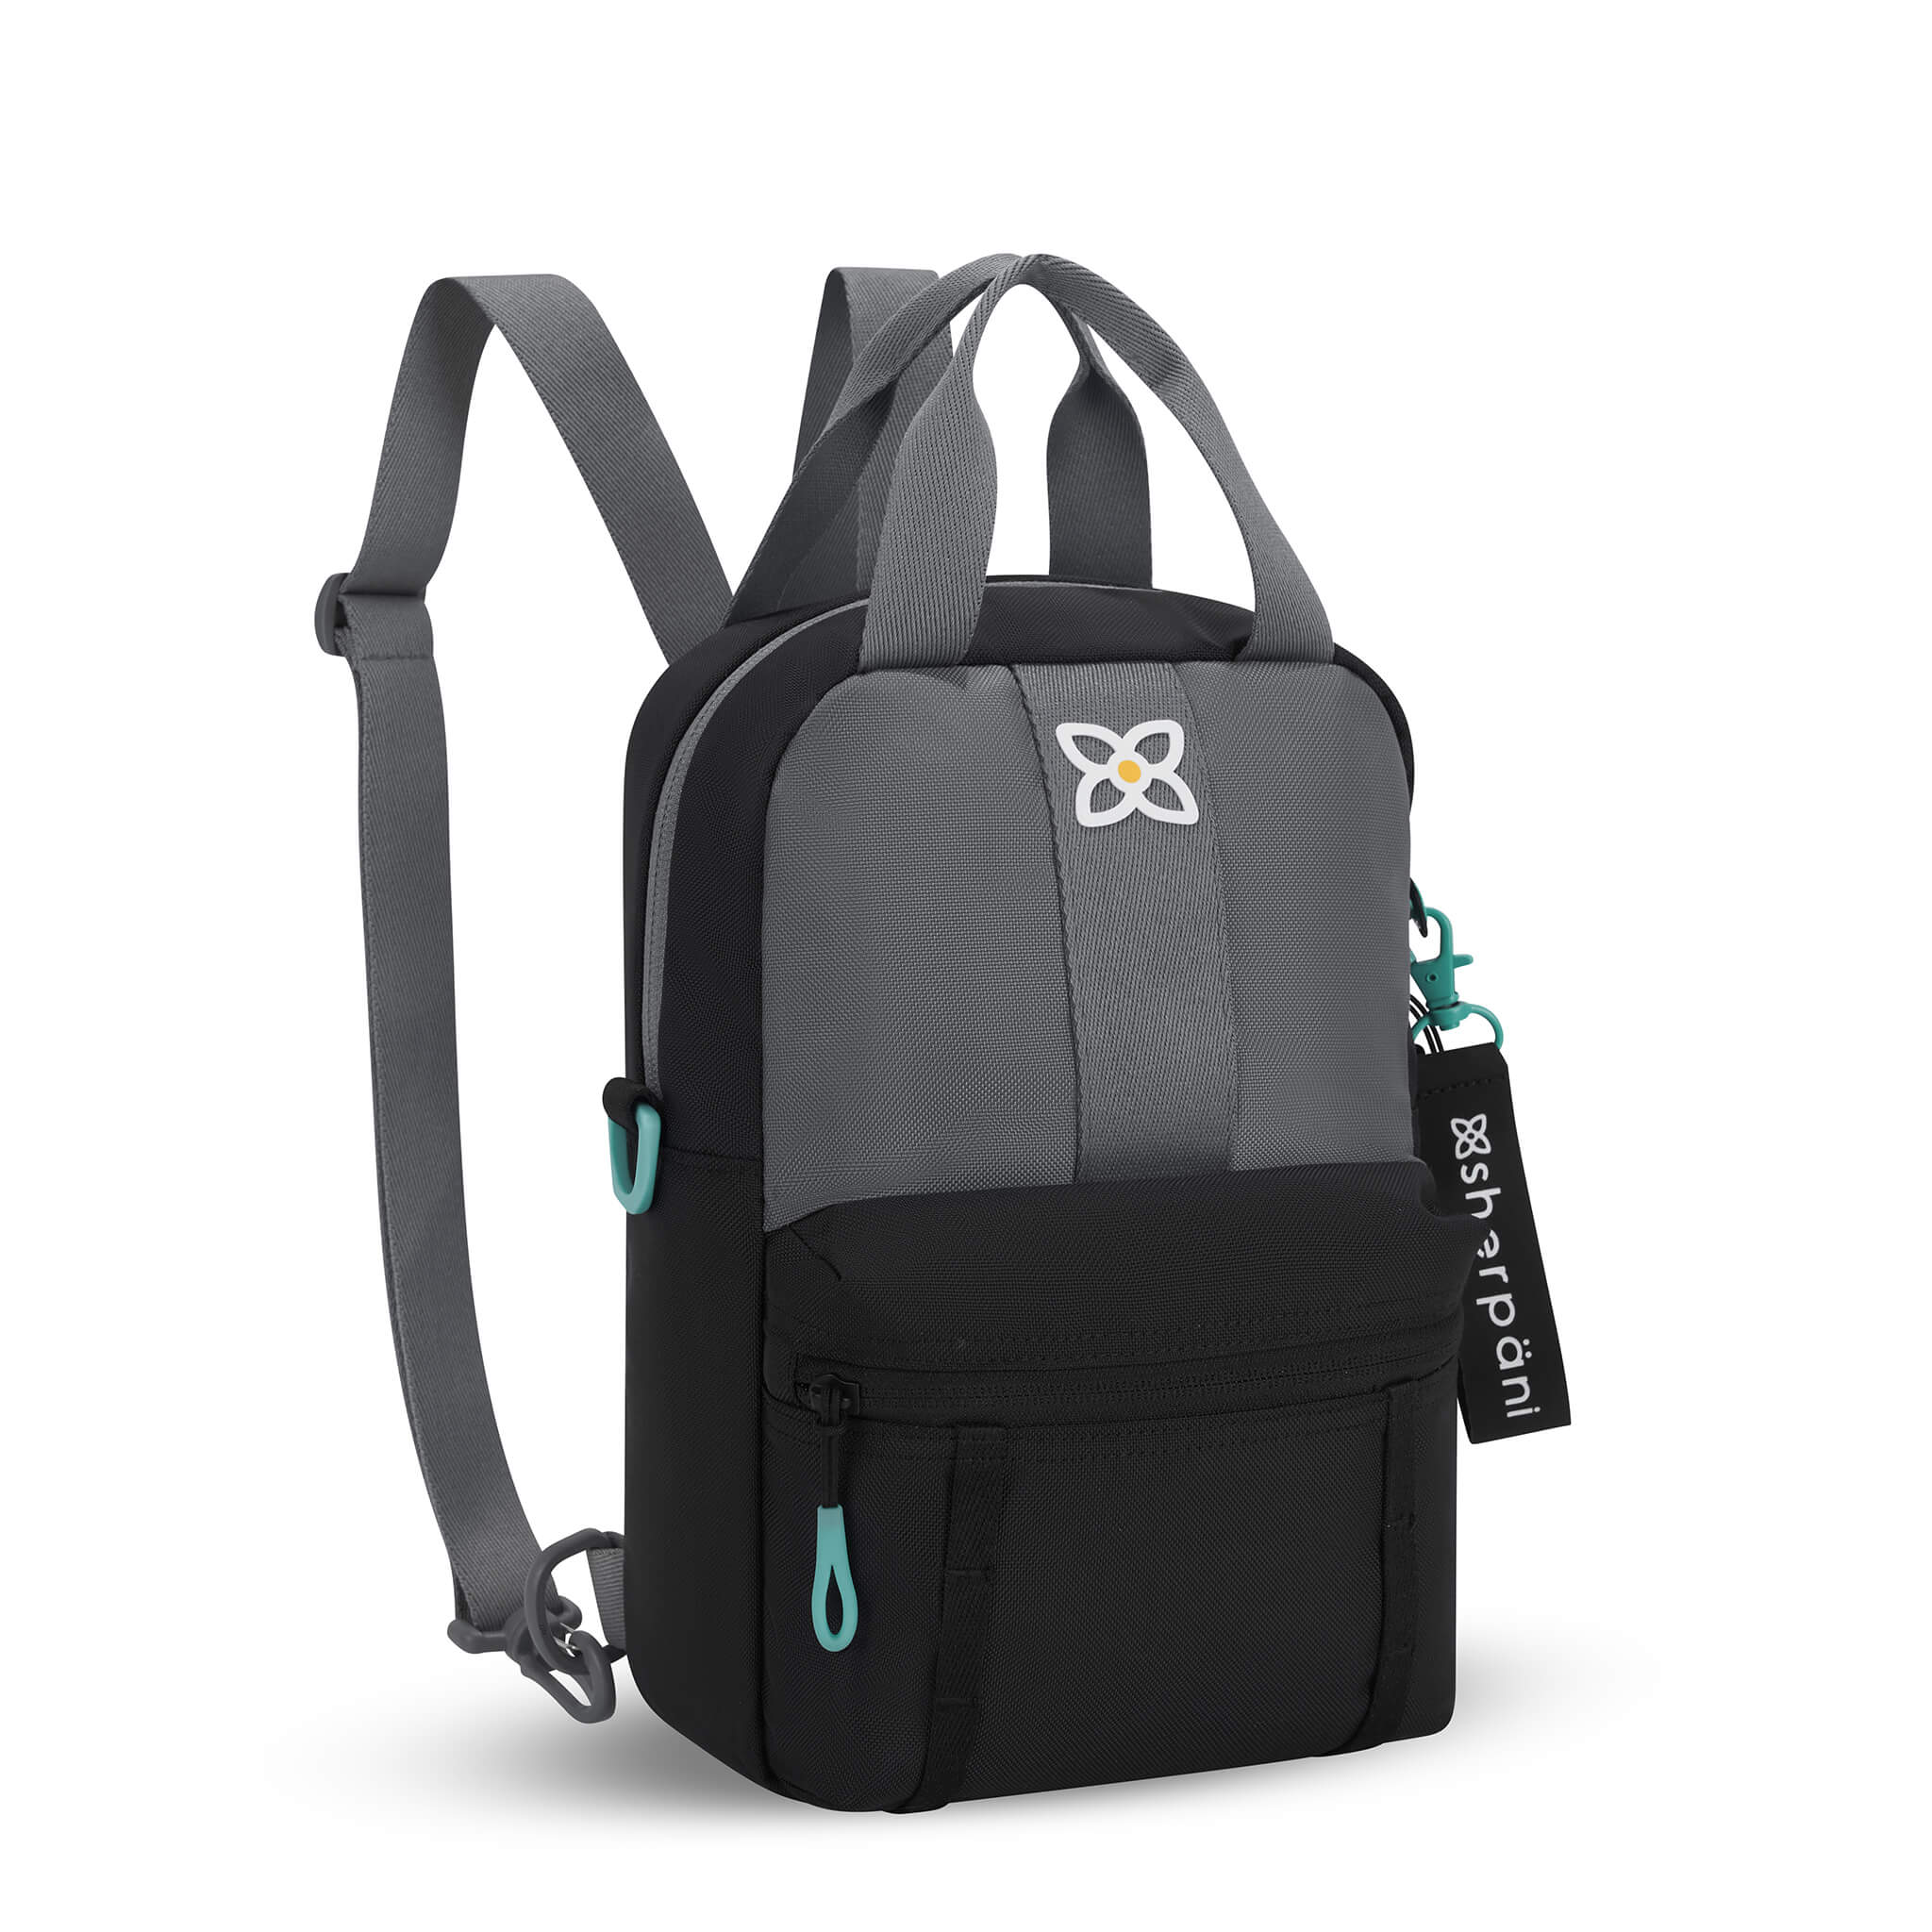 Angled front view of Sherpani mini backpack the Logan in Moonstone. The bag is black and gray with aqua accents. The Logan has fixed tote handles and adjustable backpack straps.